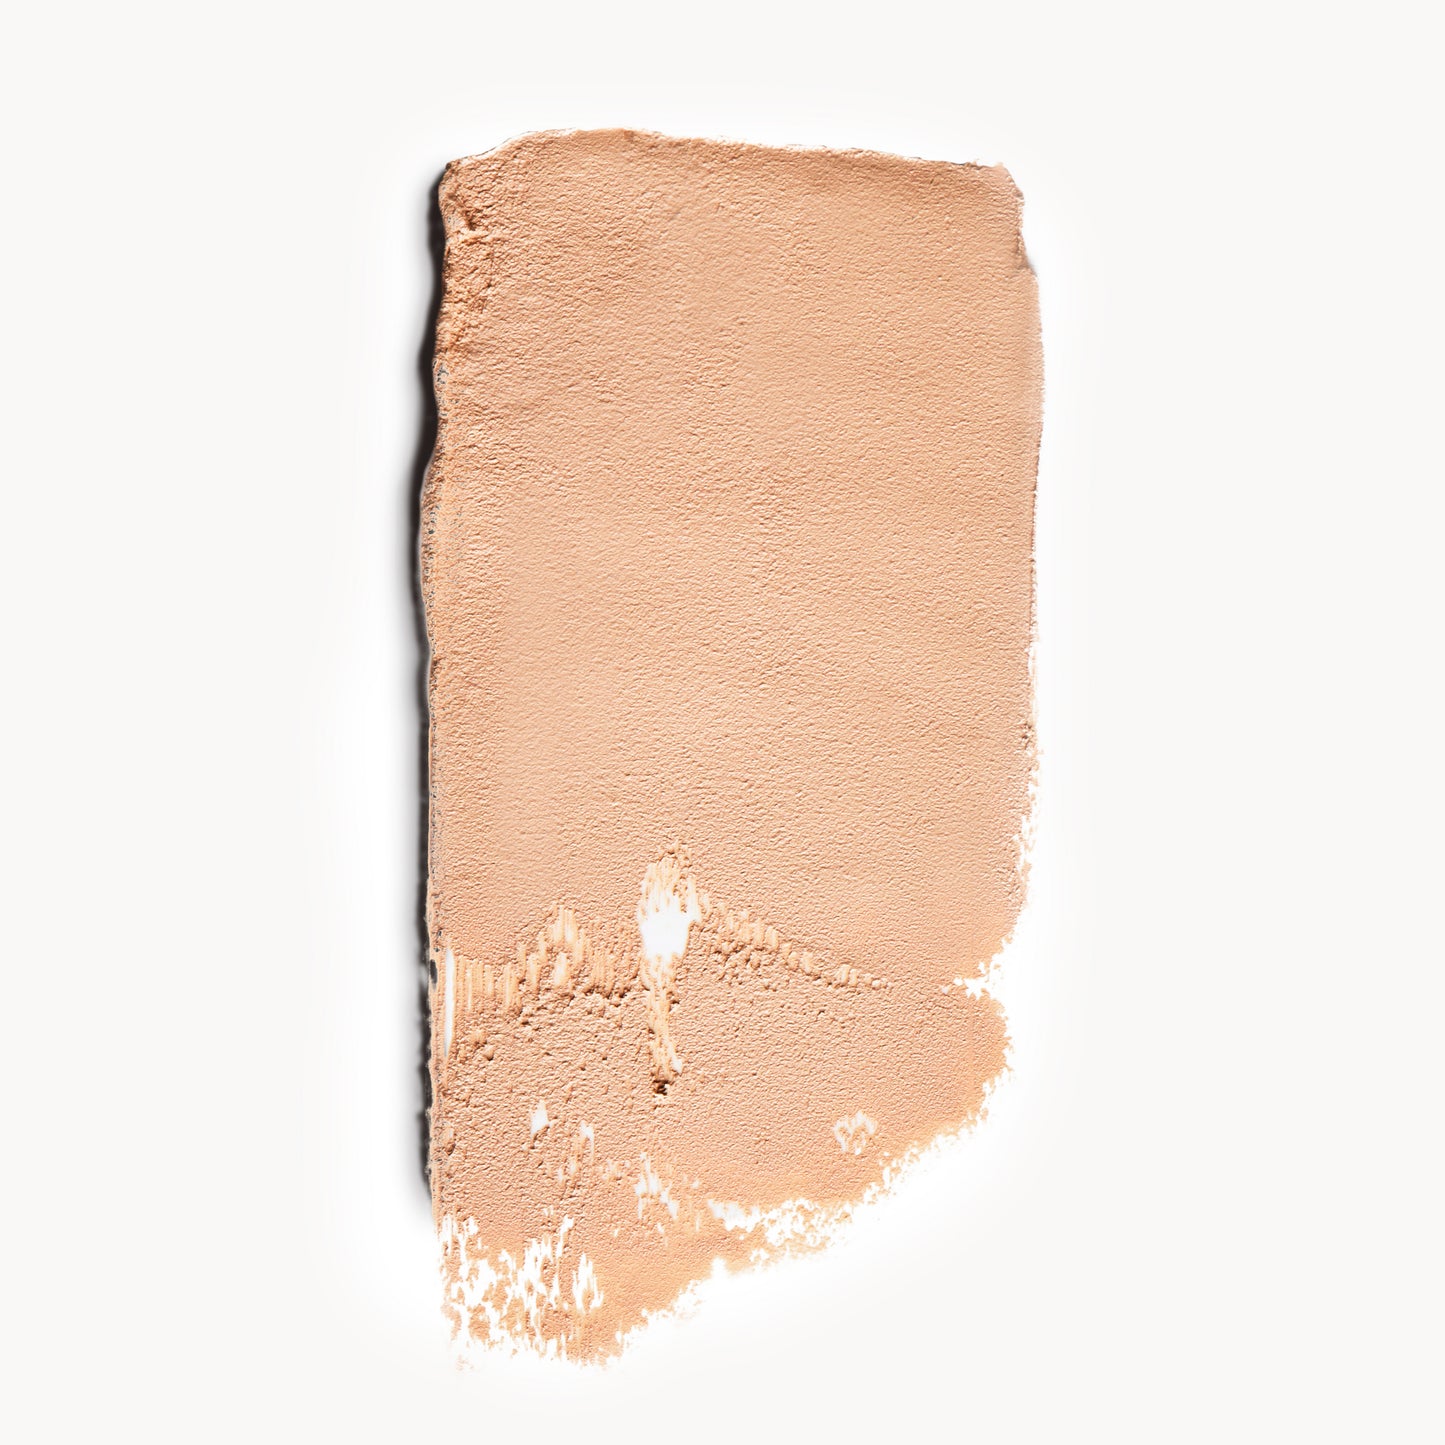 A wipe of fair, neutral-toned cream foundation on a white background